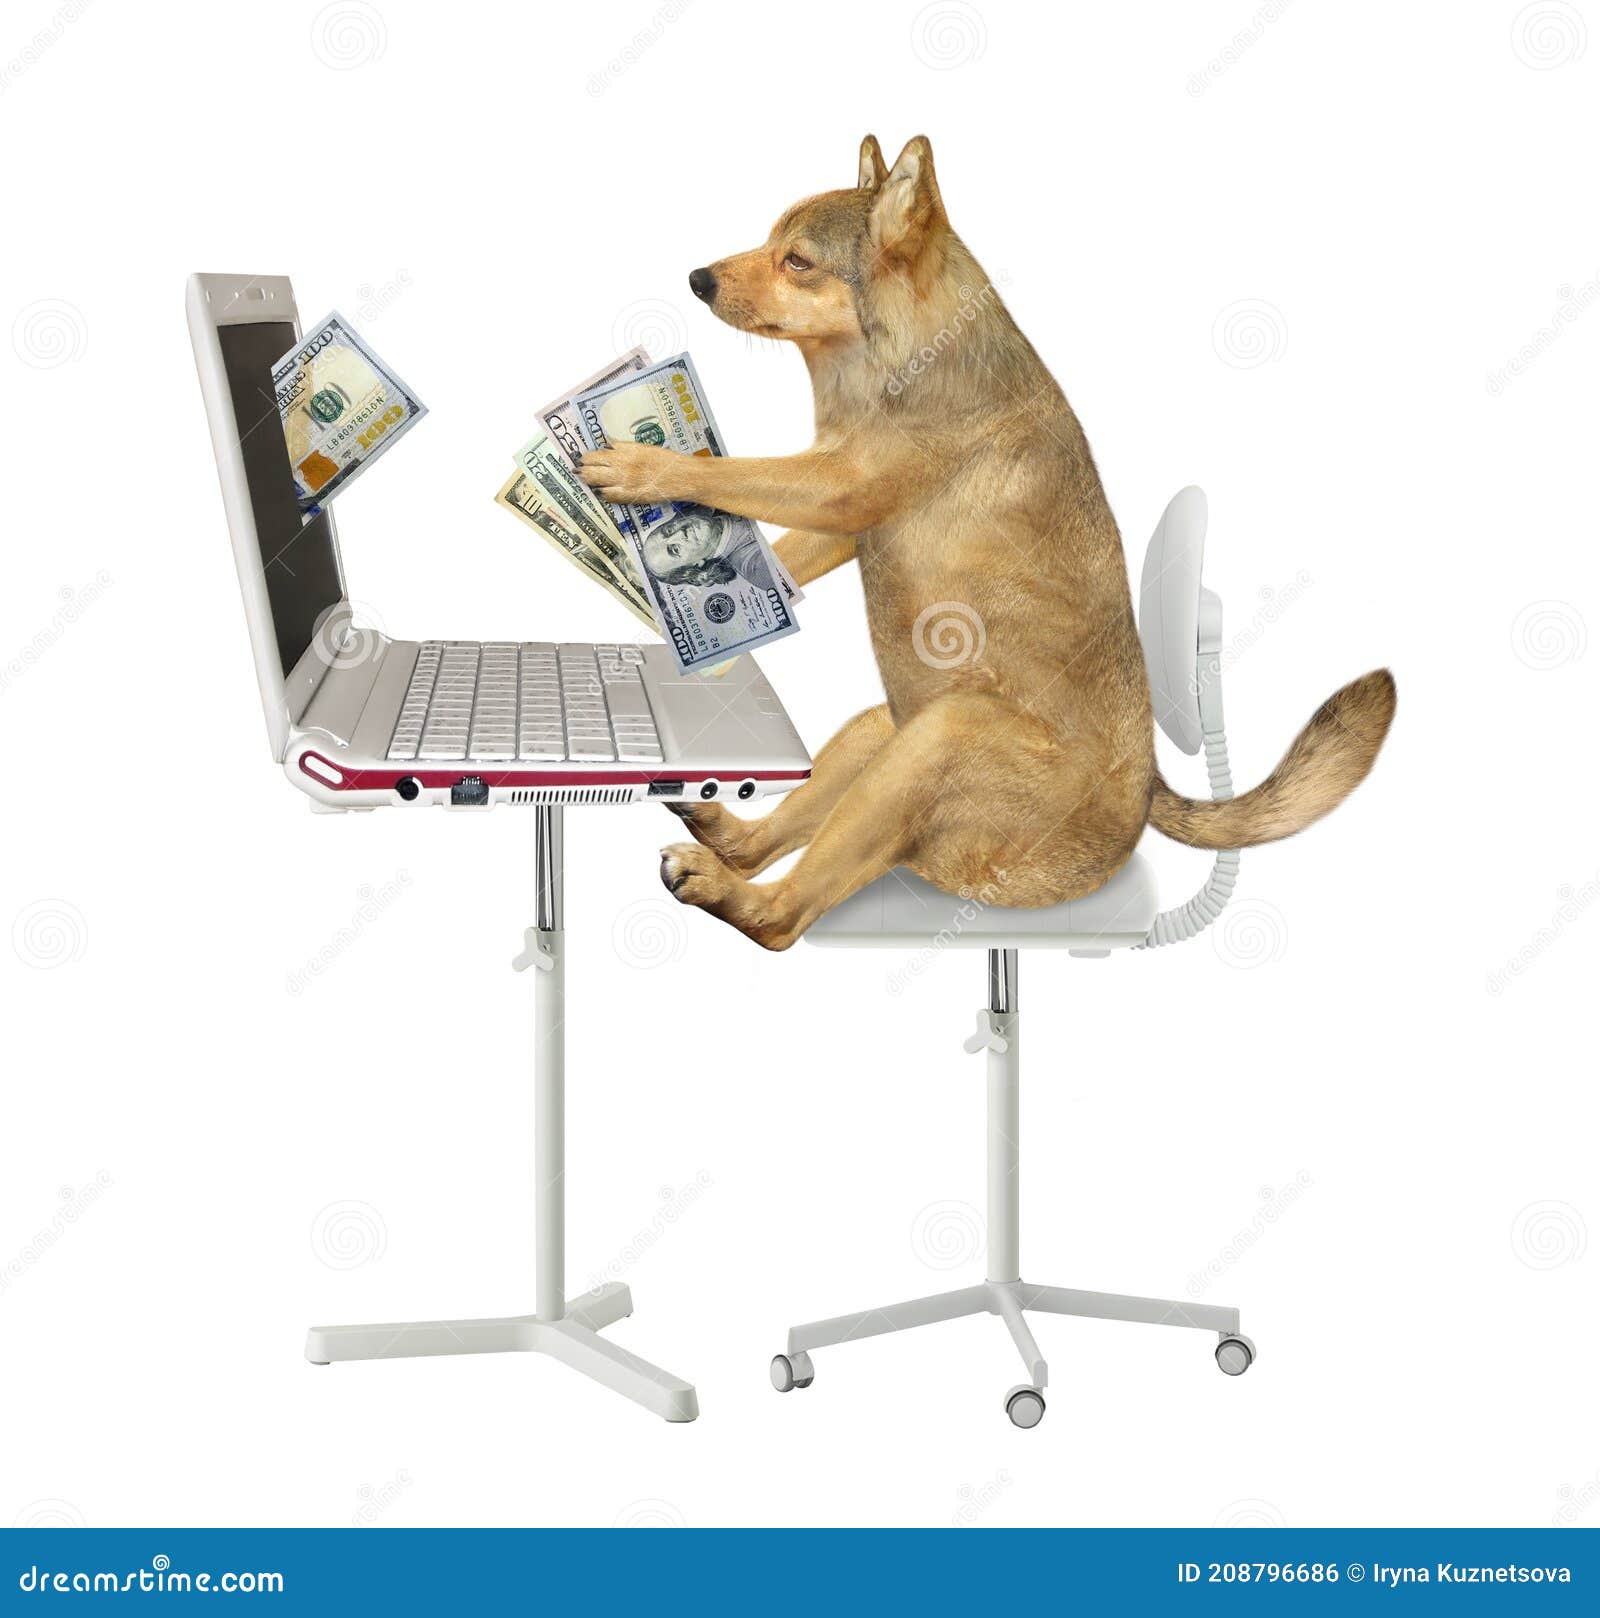 dog earns dollars from laptop 2